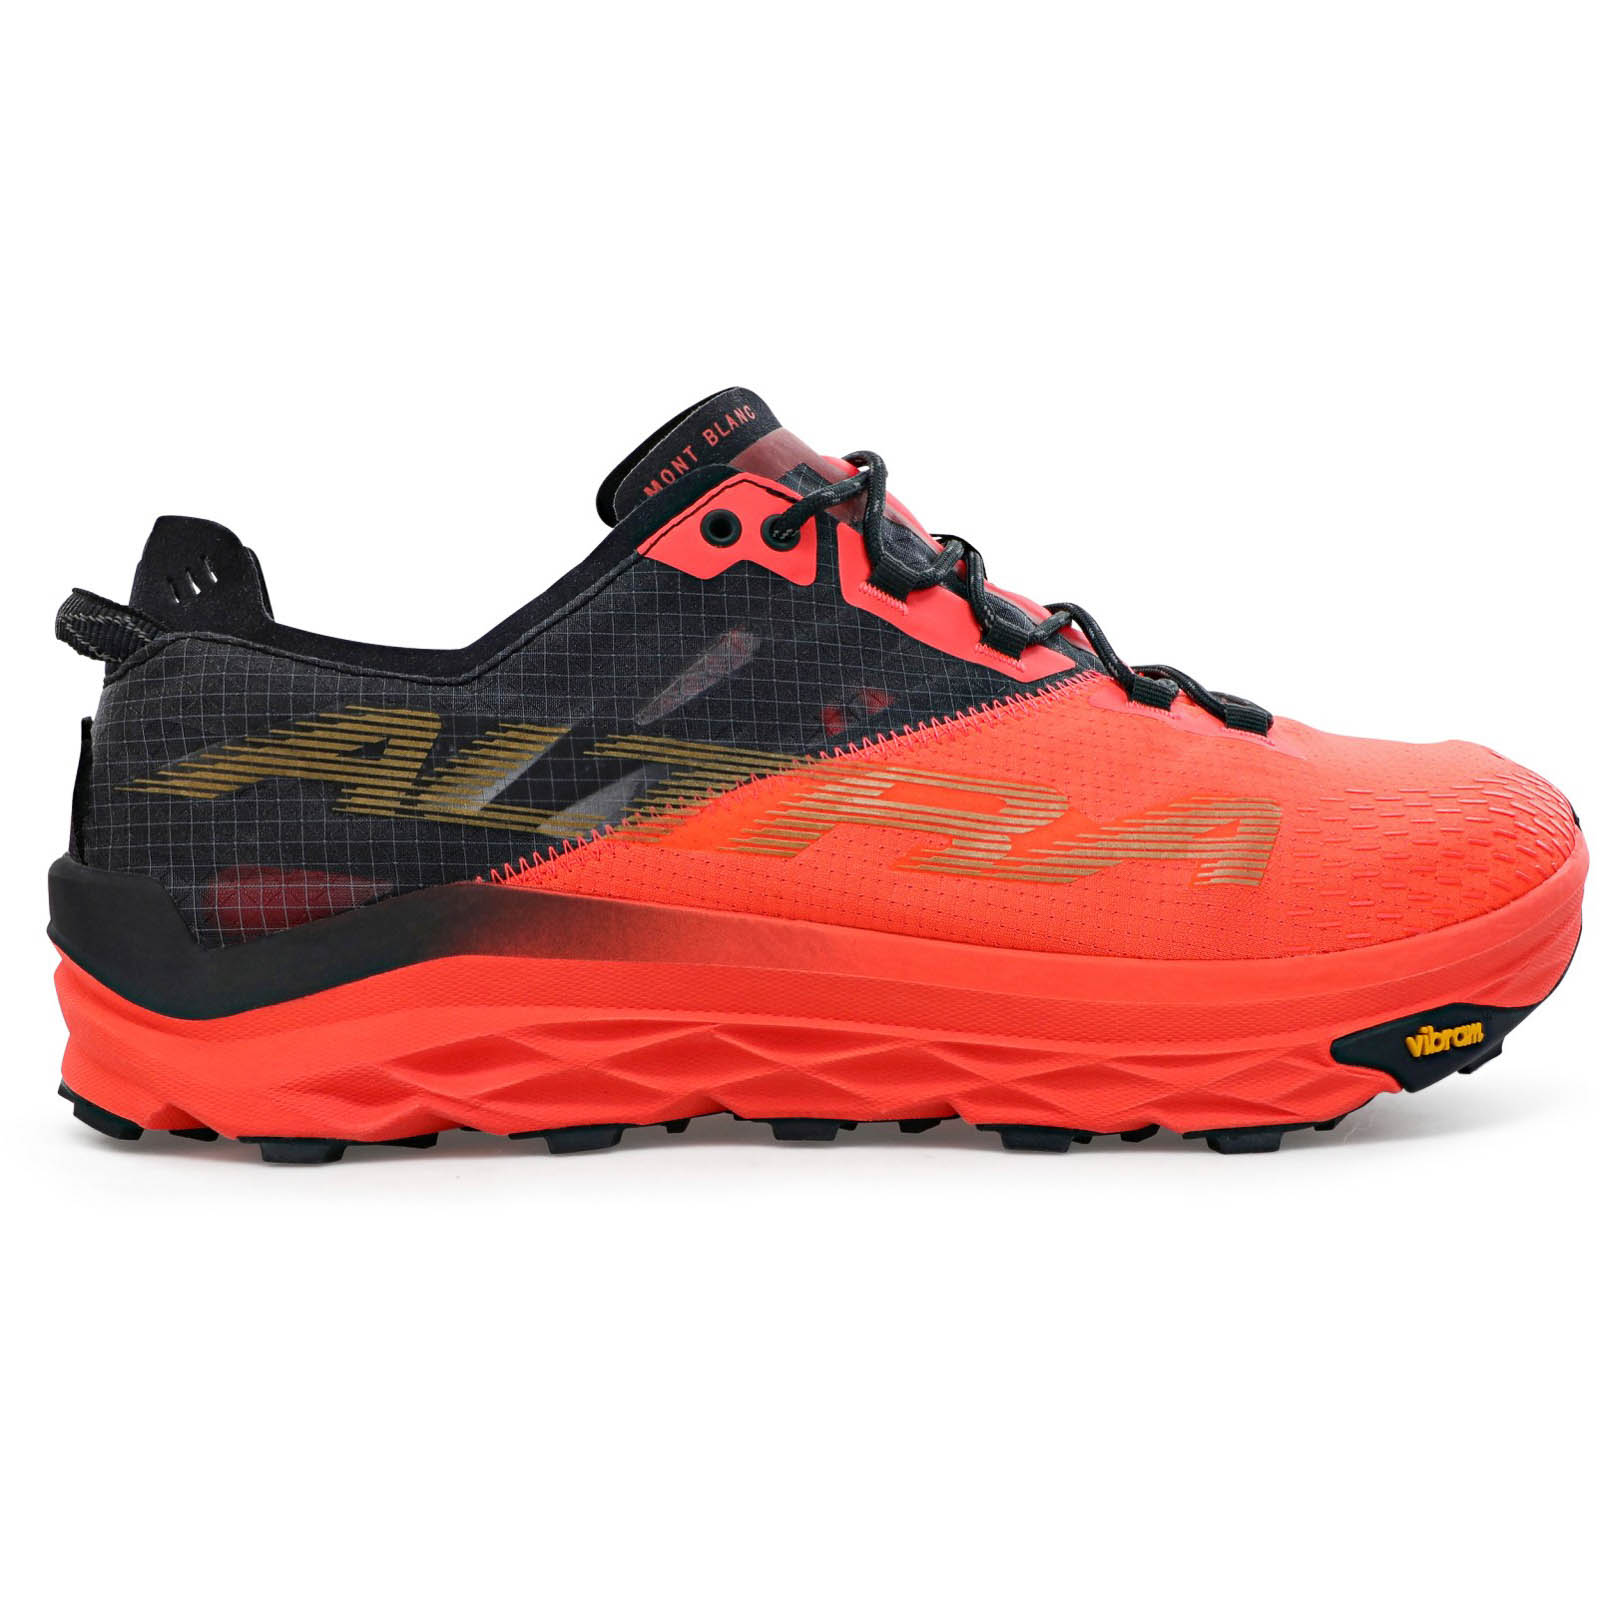 Altra Mont Blanc Trail-Running Shoe Review